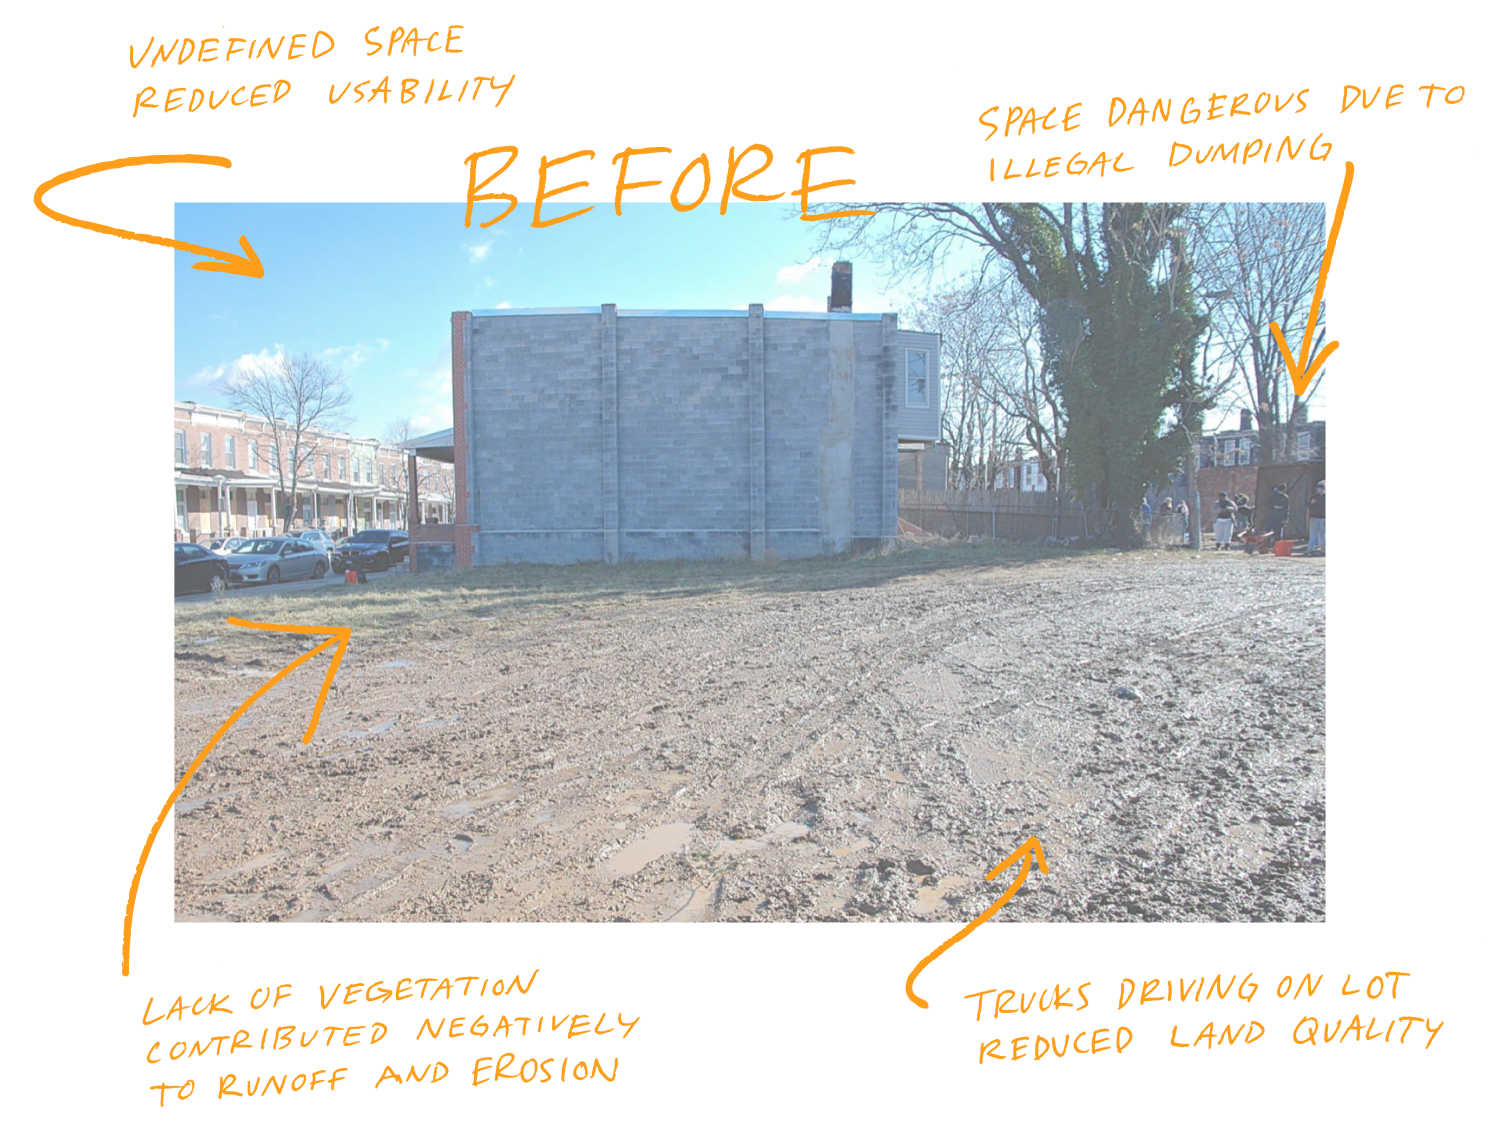 Before: Undefined space reduced usability, space dangerous due to illegal dumping, lack of vegetation contributed negatively to runoff and erosion, truck driving on lot reduced land quality.